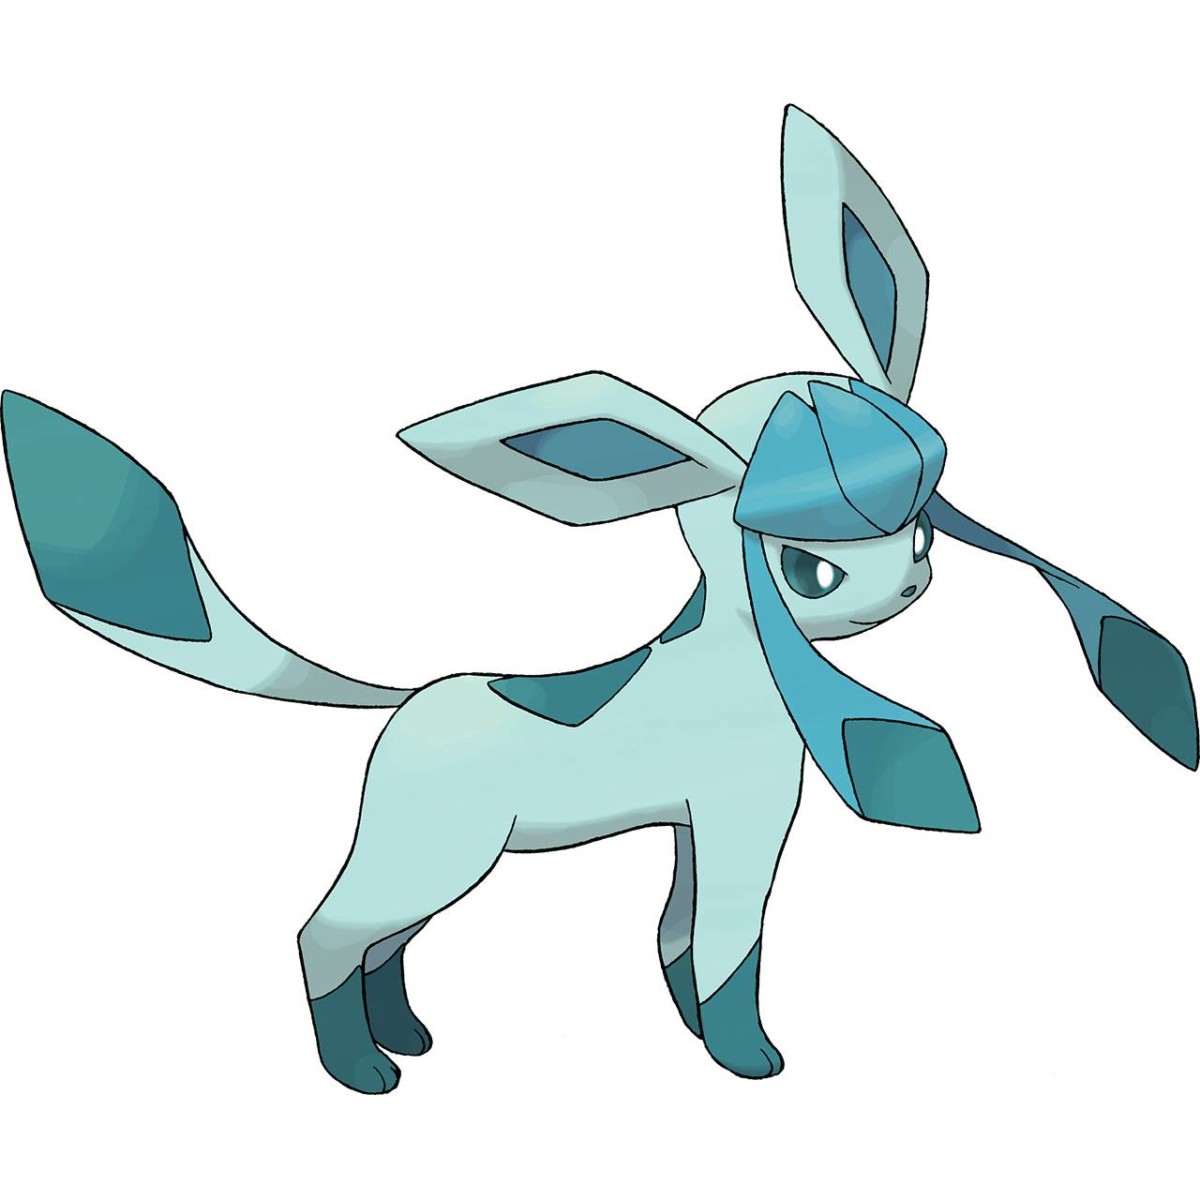 Glaceon image